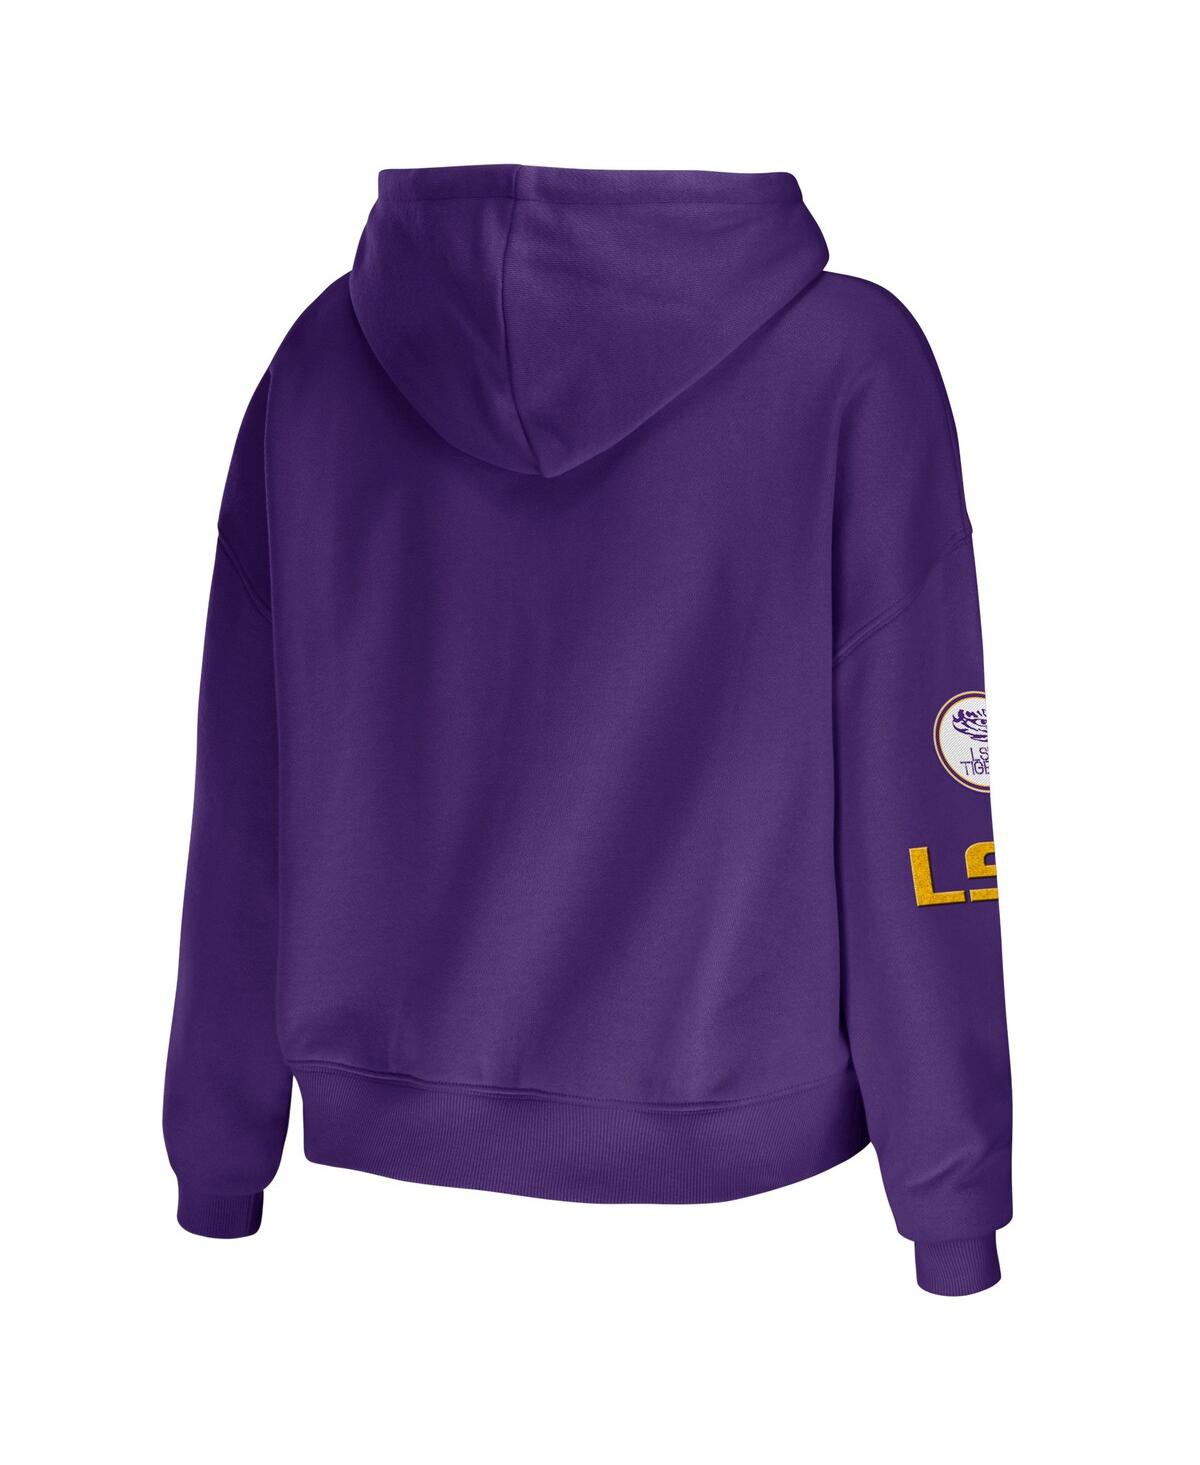 Shop Wear By Erin Andrews Women's  Purple Lsu Tigers Mixed Media Cropped Pullover Hoodie